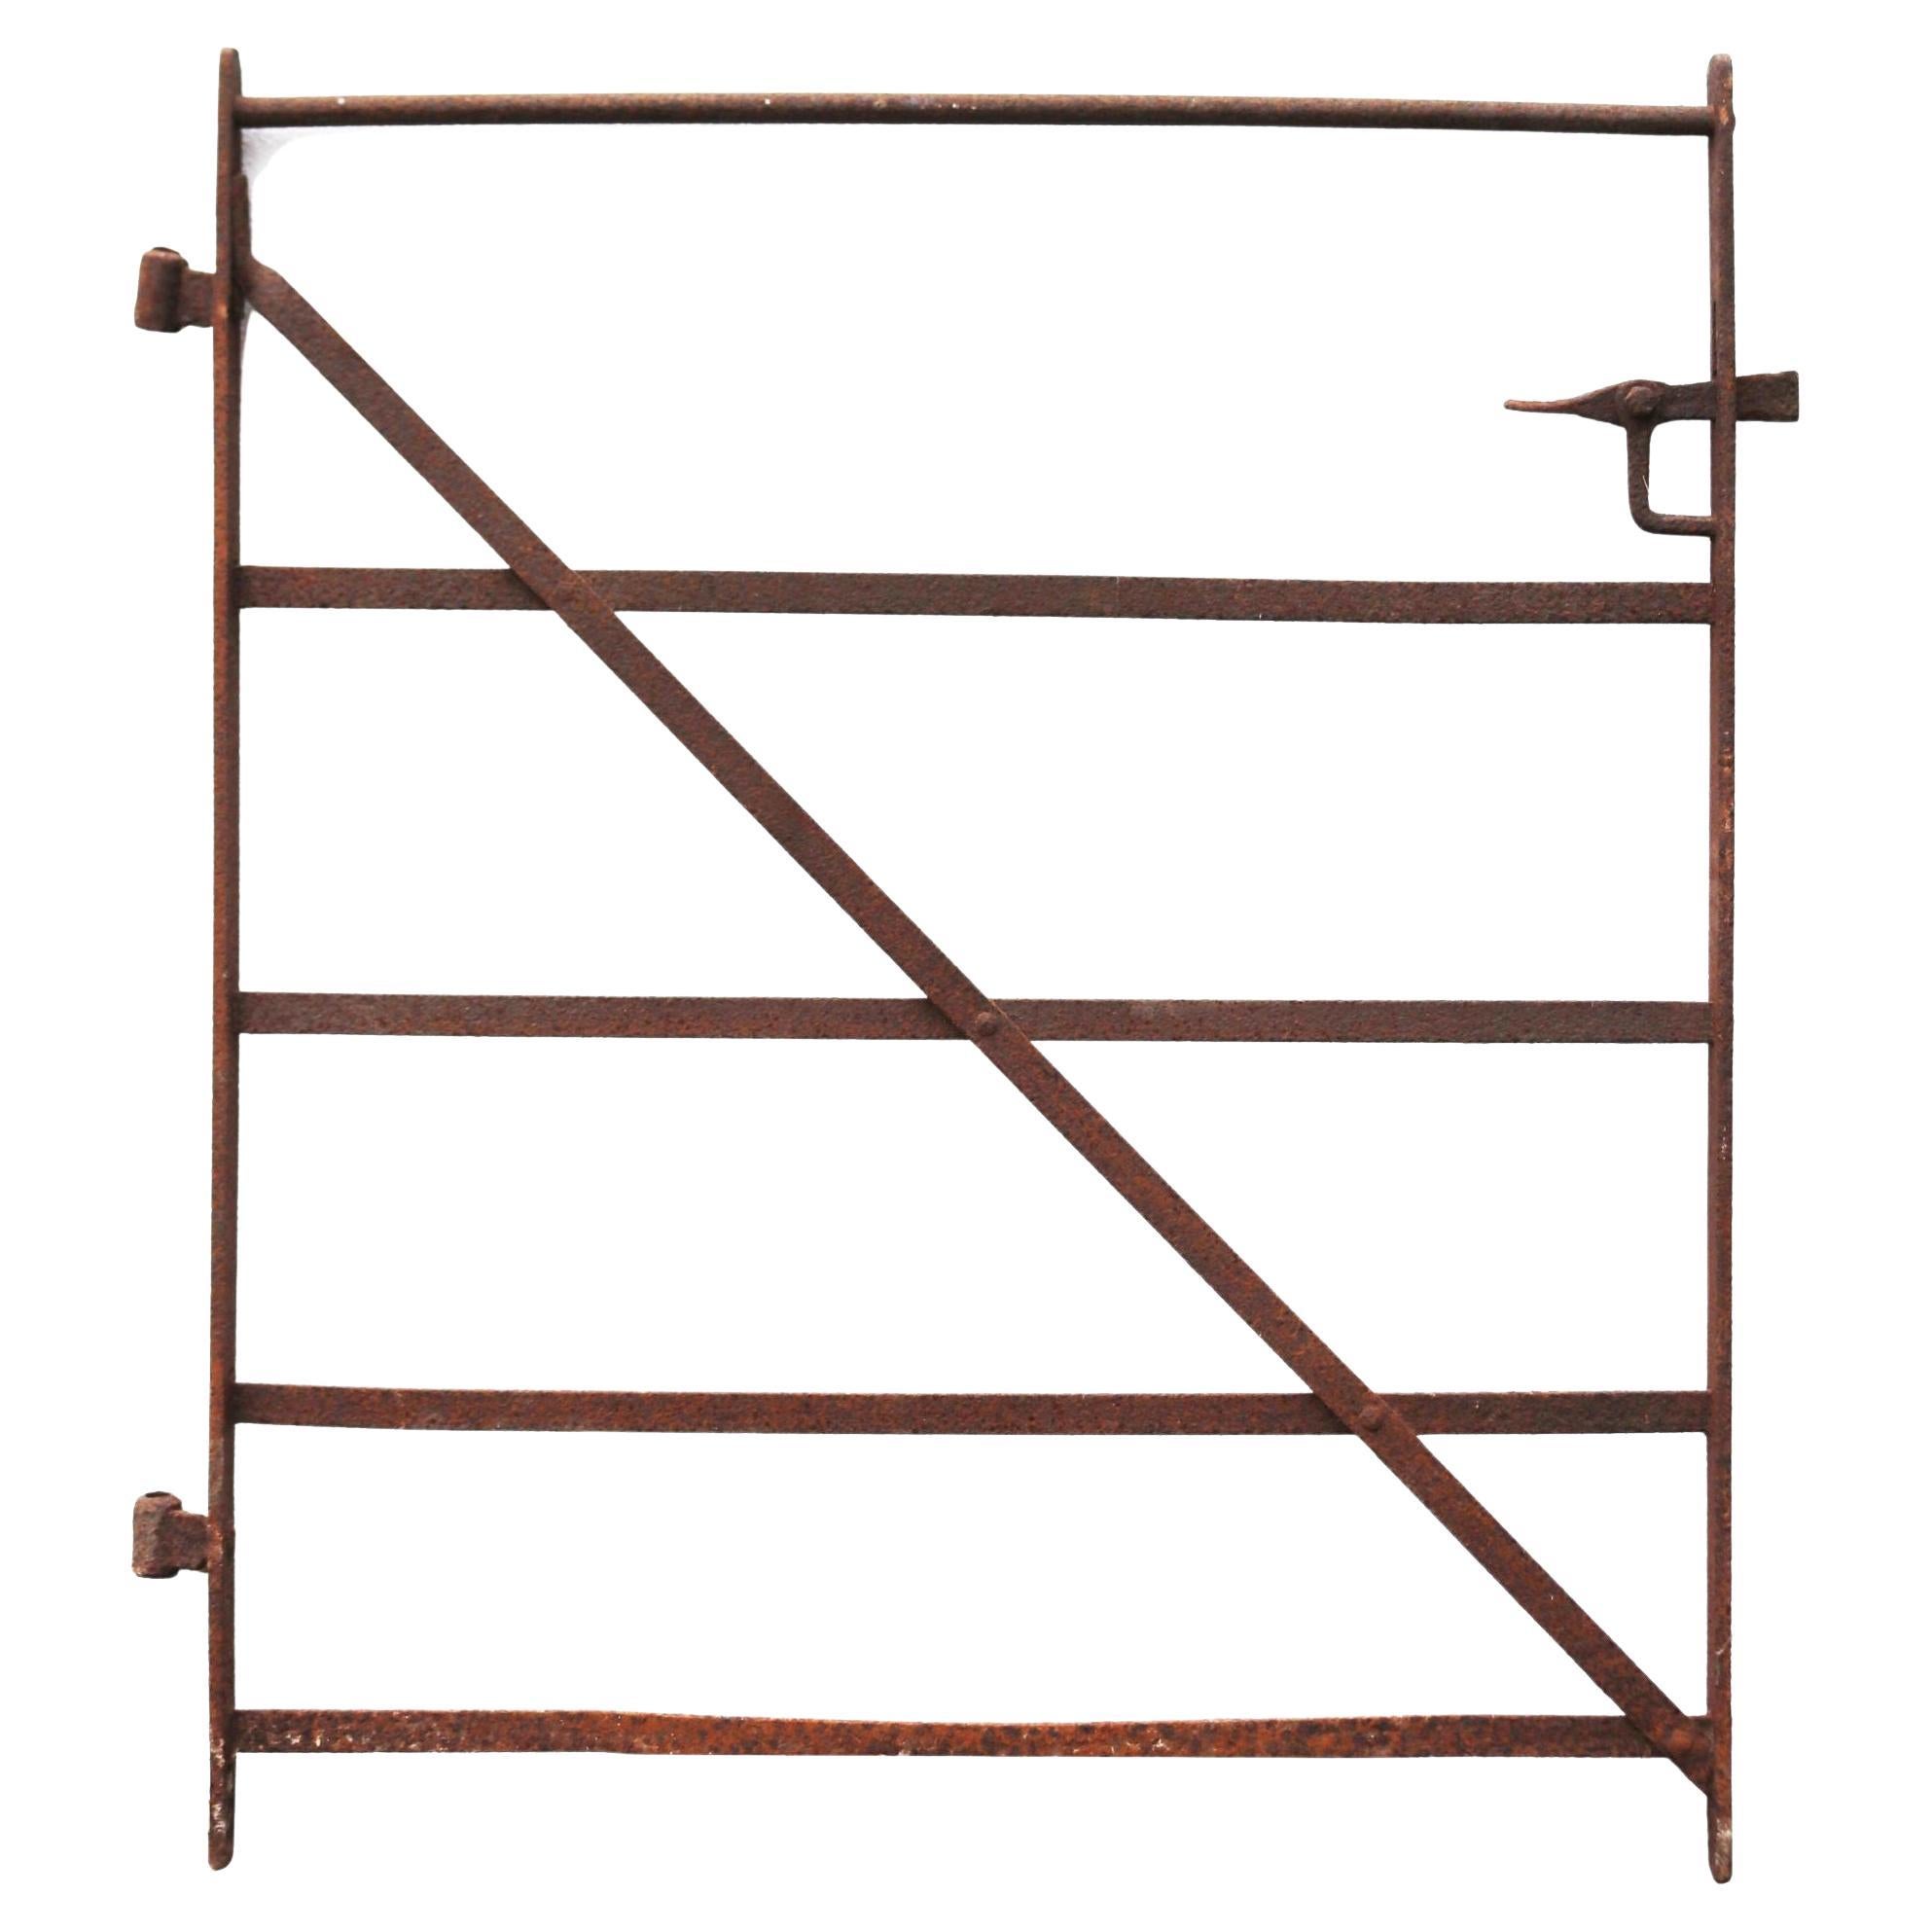 Antique Wrought Iron Strap Work Gate For Sale